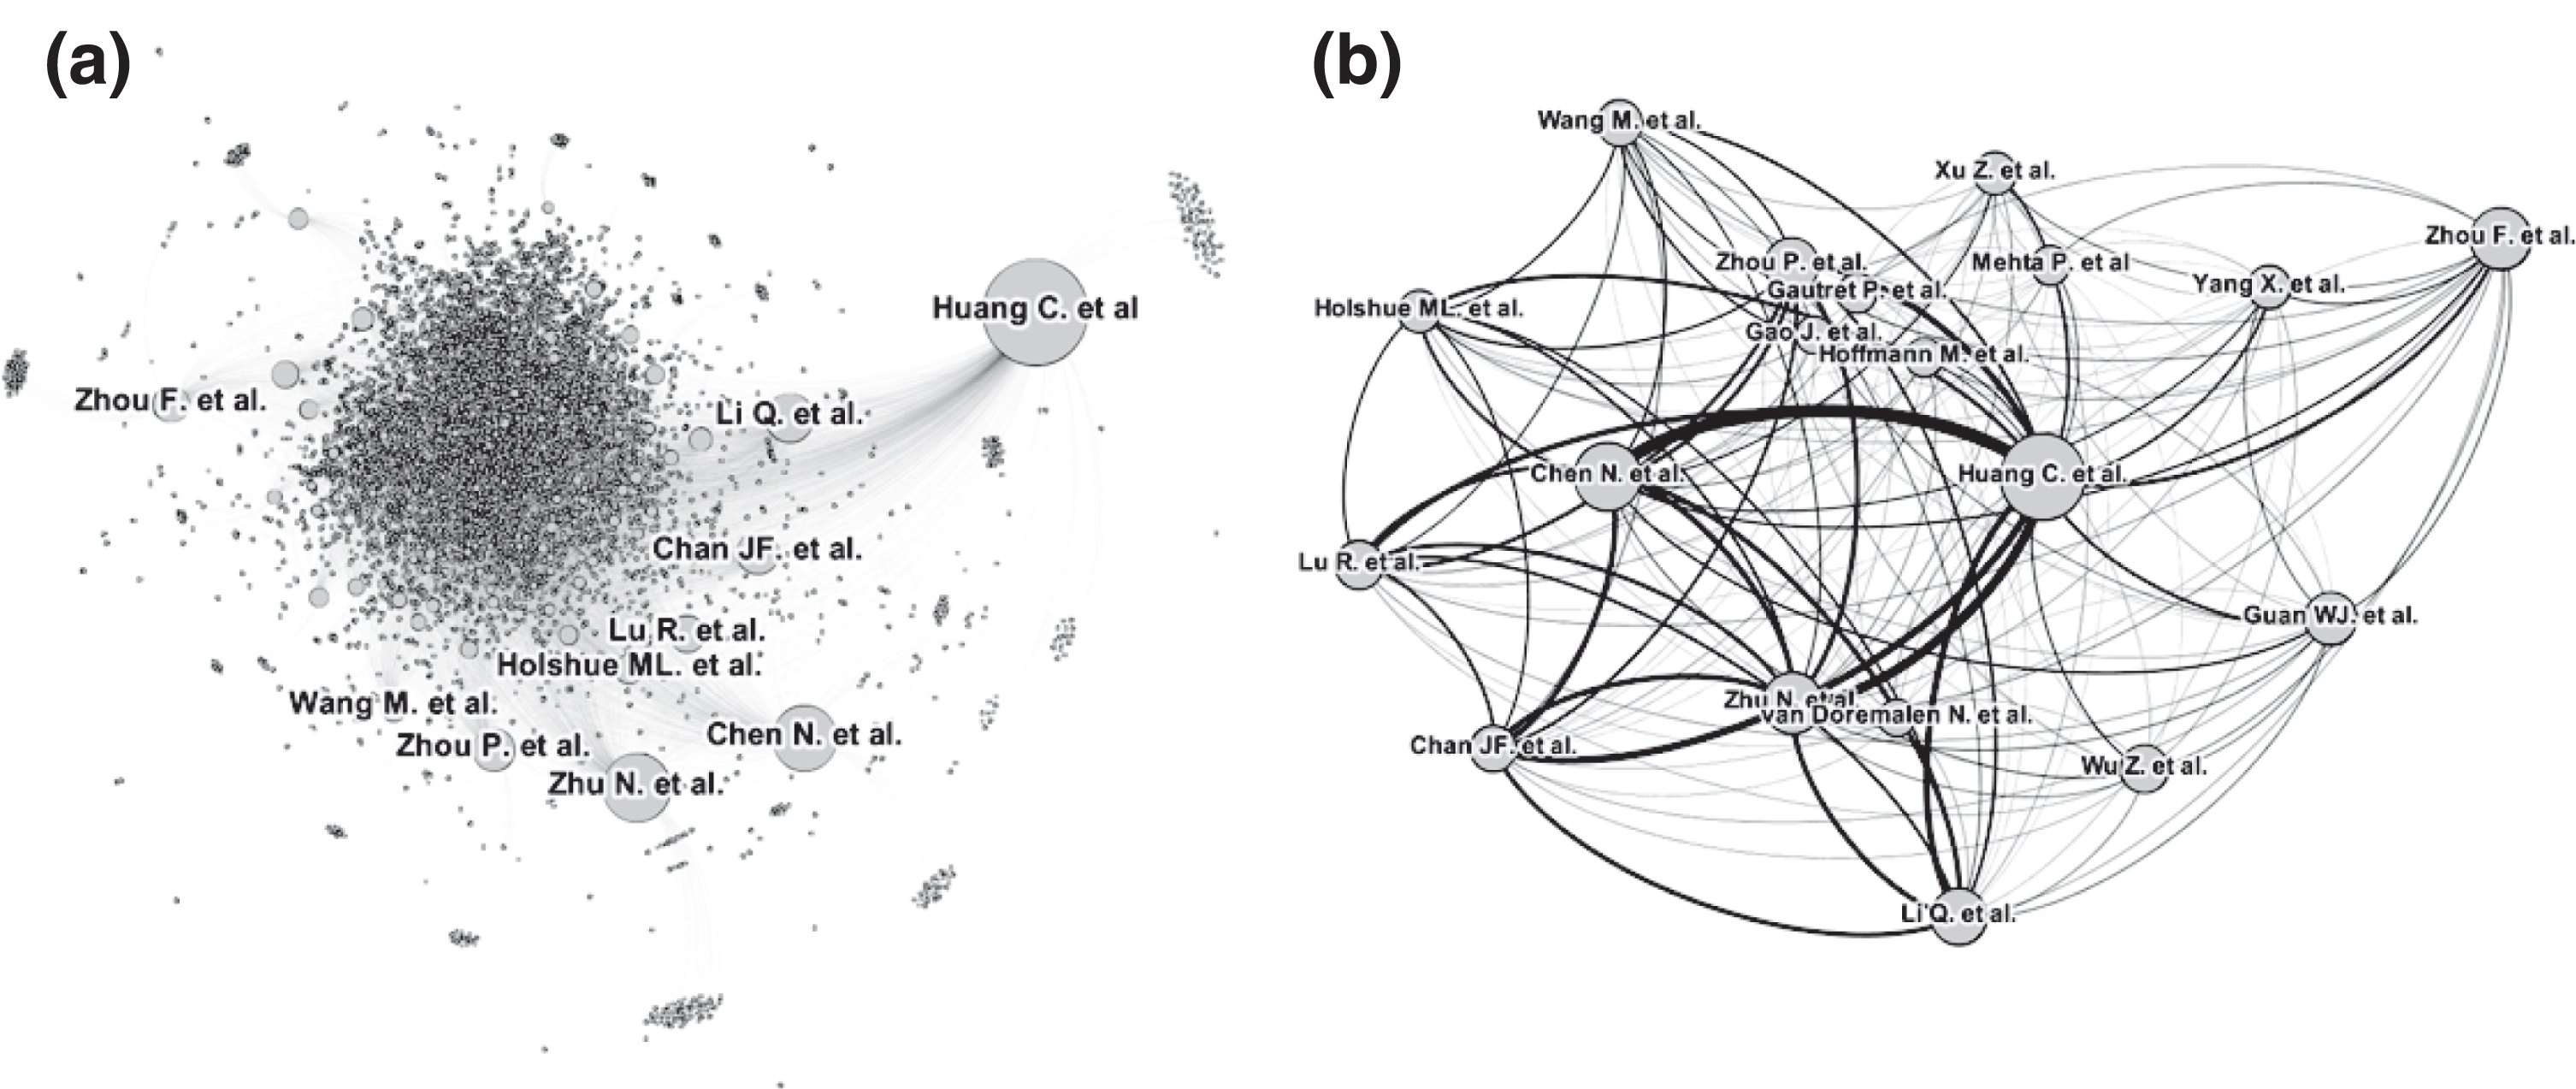 (a) COVID-19 PMC citation network graph, (b) COVID-19 PMC co-citation network graph. Graphs are in force atlas 2 layout. (a) COVID-19 PMC citation network is a directed network with 6,650 articles (nodes) and 25,095 citations (edges). Each circle represent an article, each arch represents a citation, and diameter of circle represents number of citation in citation network. (b) COVID-19 PMC co-citation network is an undirected network. The main article cluster (connected component) consist of 2,811 nodes and 78,844 edges. Graph is filtered to represent 19 major articles in PMC co-citation network (co-citation degree ≥ 600). Each circle represent an article, each arch represents a co-citation relation, thickness of edges represents co-citation frequencies.